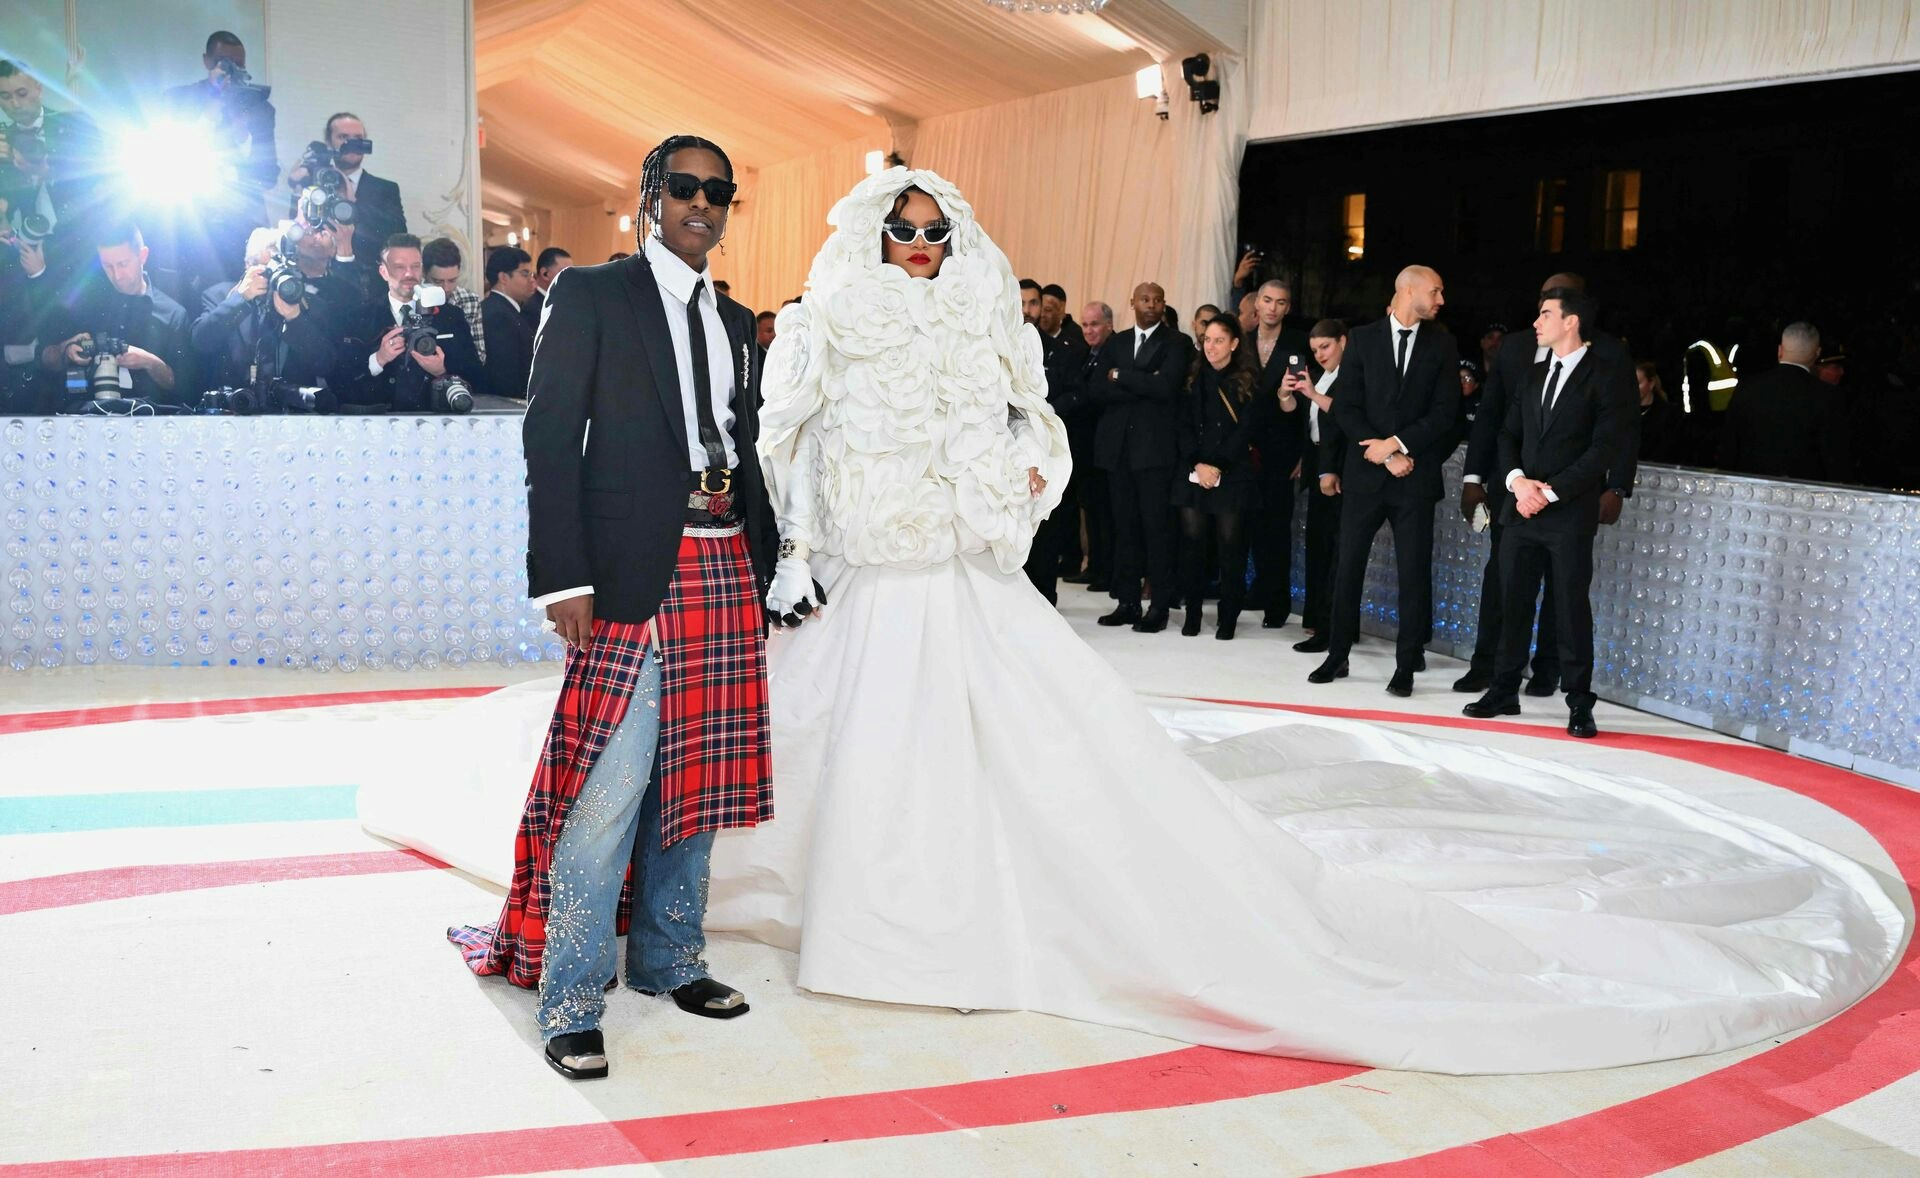 Barbadian singer Rihanna and her partner ASAP Rocky arrive for the 2023 Met Gala at the Metropolitan Museum of Art on May 1, 2023, in New York. - The Gala raises money for the Metropolitan Museum of Art's Costume Institute. The Gala's 2023 theme is "Karl Lagerfeld: A Line of Beauty." (Photo by ANGELA WEISS / AFP)